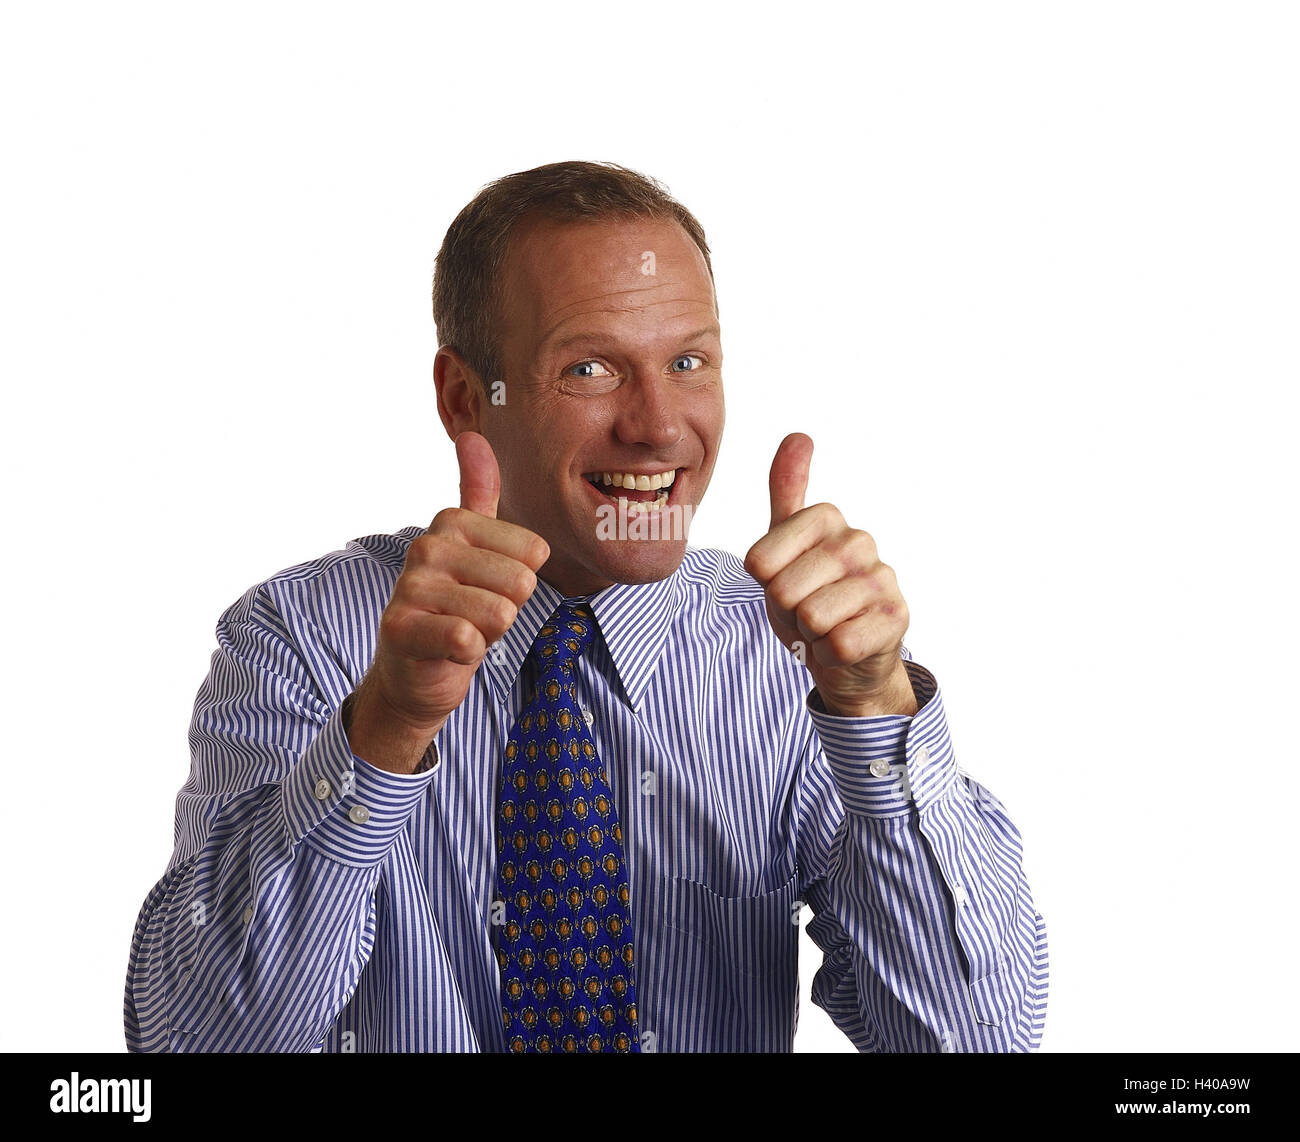 Man, shirt, tie, gesture, pollex, high, positively, portrait, Men, businessman, manager, studio, cut out, O.K., okay, success, perfectly, in order, cheering, enthusiasm, joy, happy, pleases, enthusiastically, near, Stock Photo